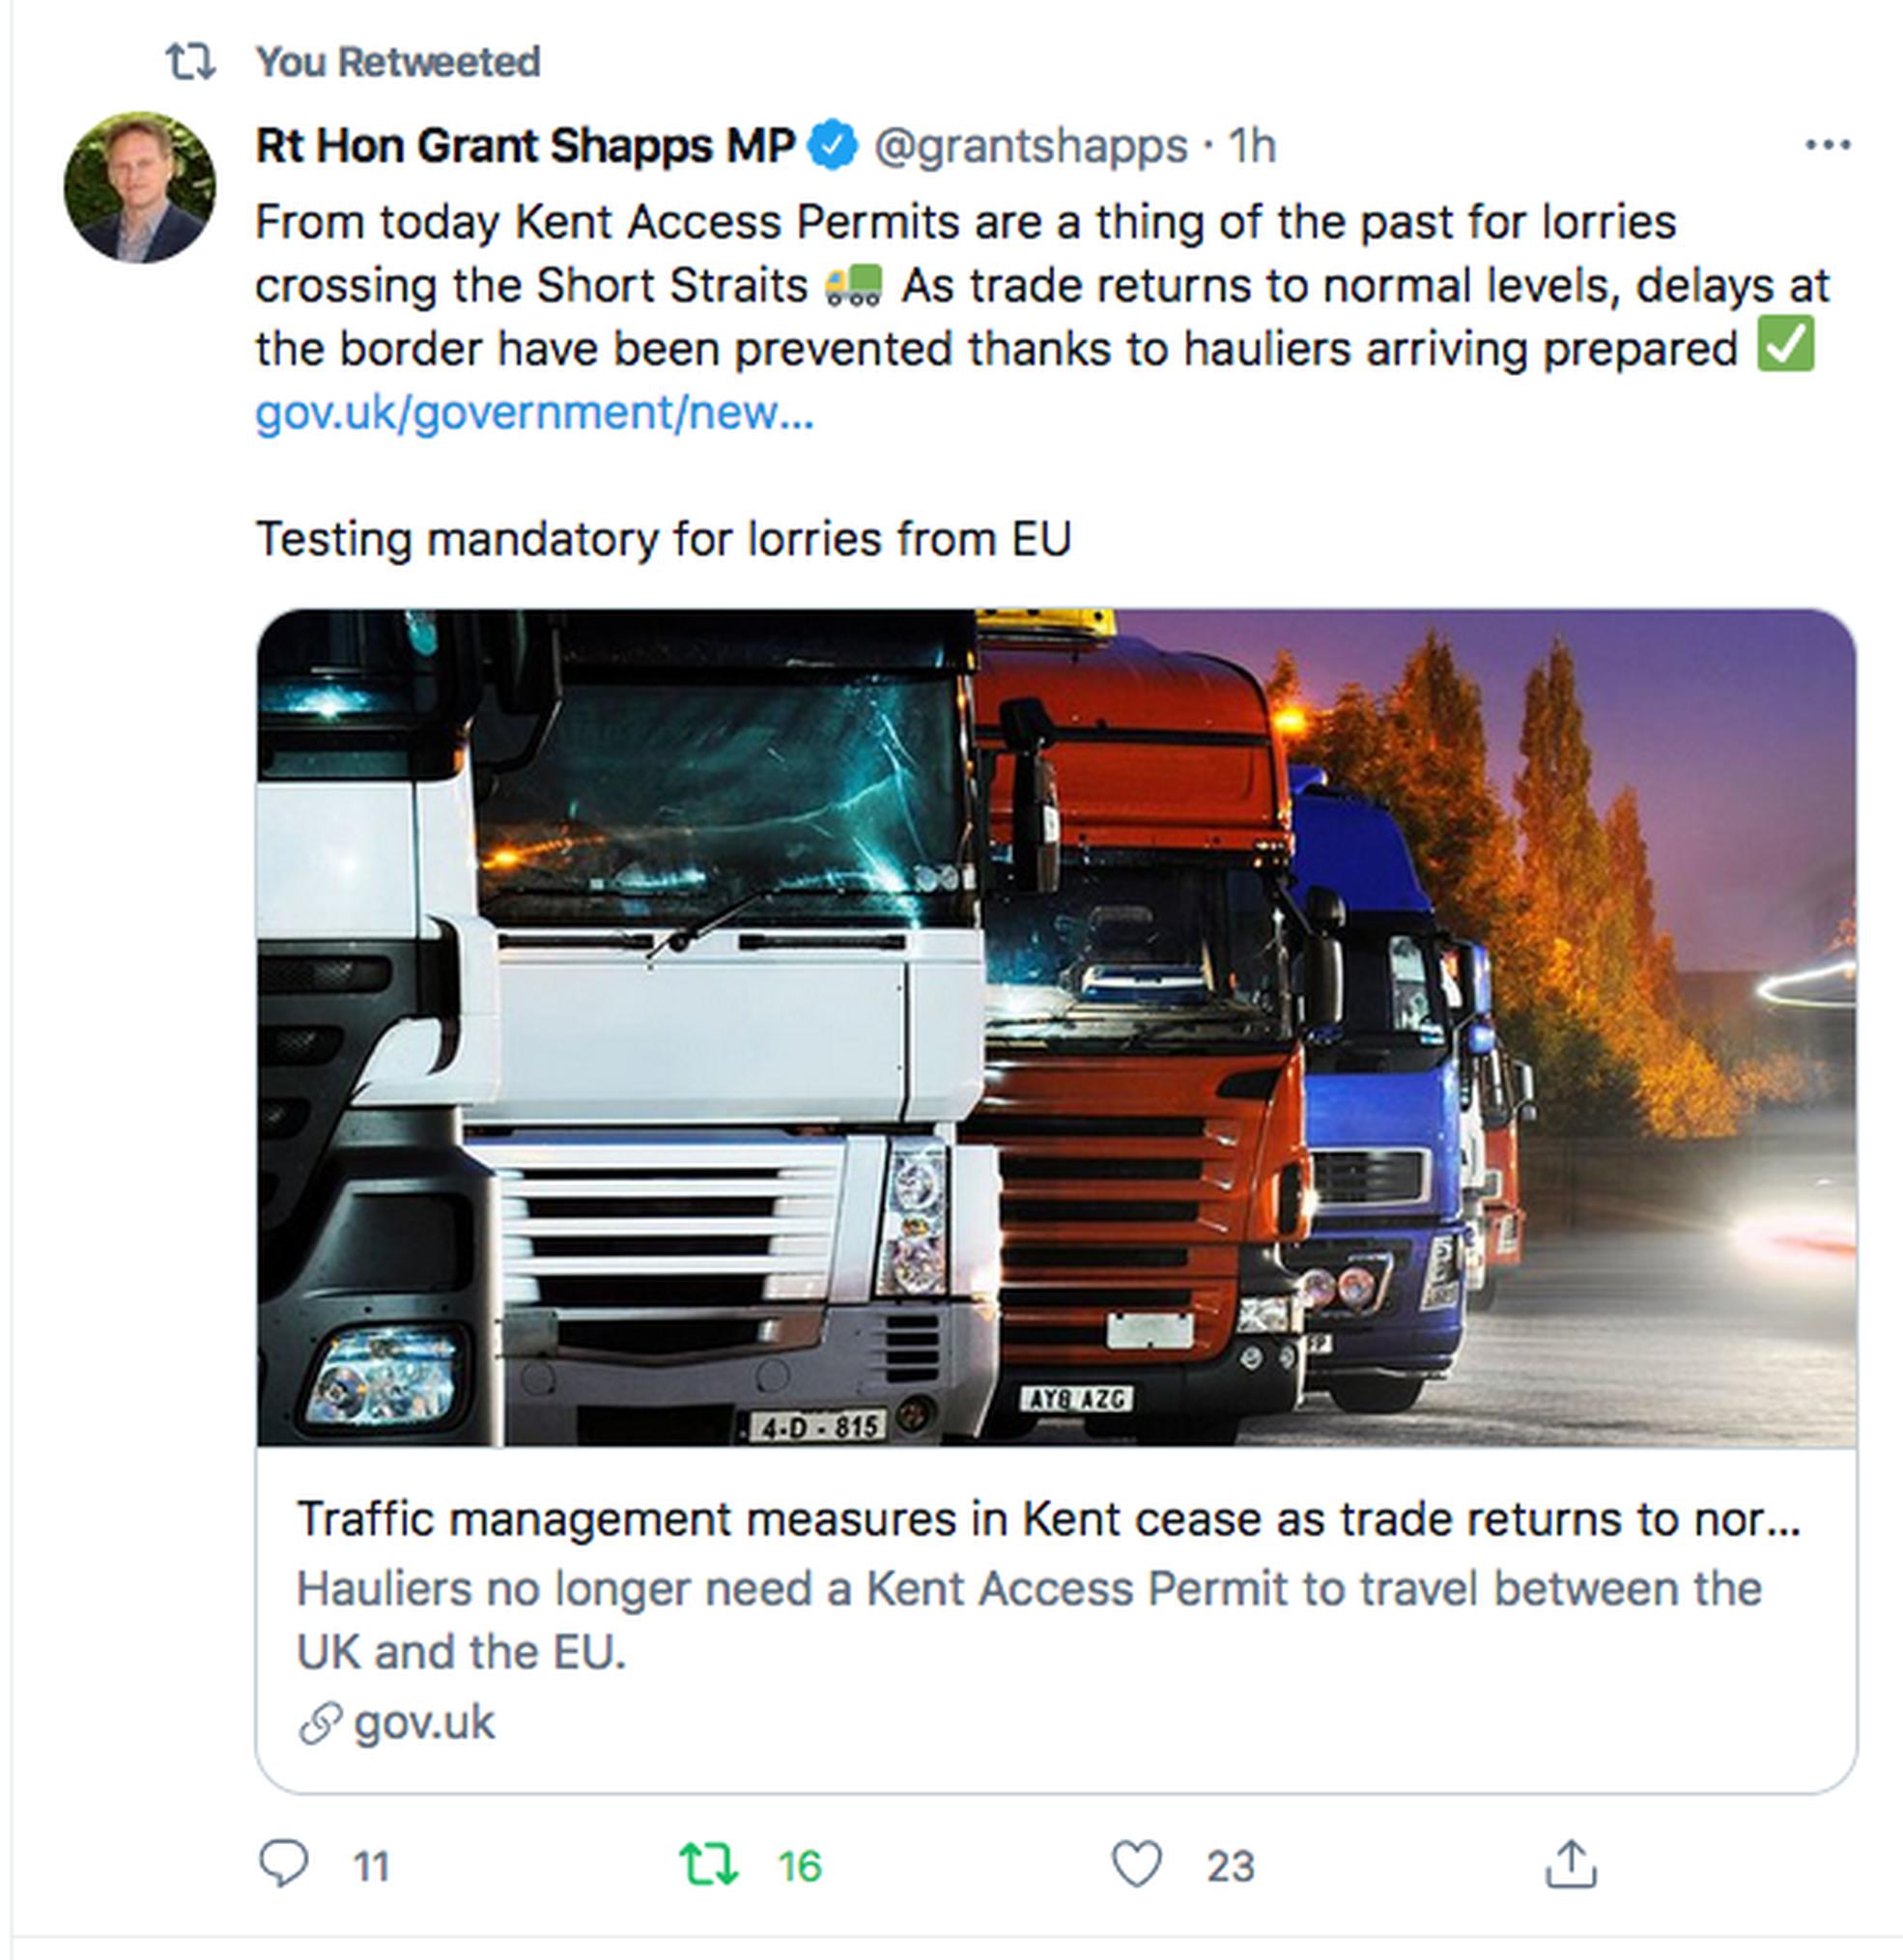 Transport secretary Grant Shapps used Twitter to announced the end of KAP